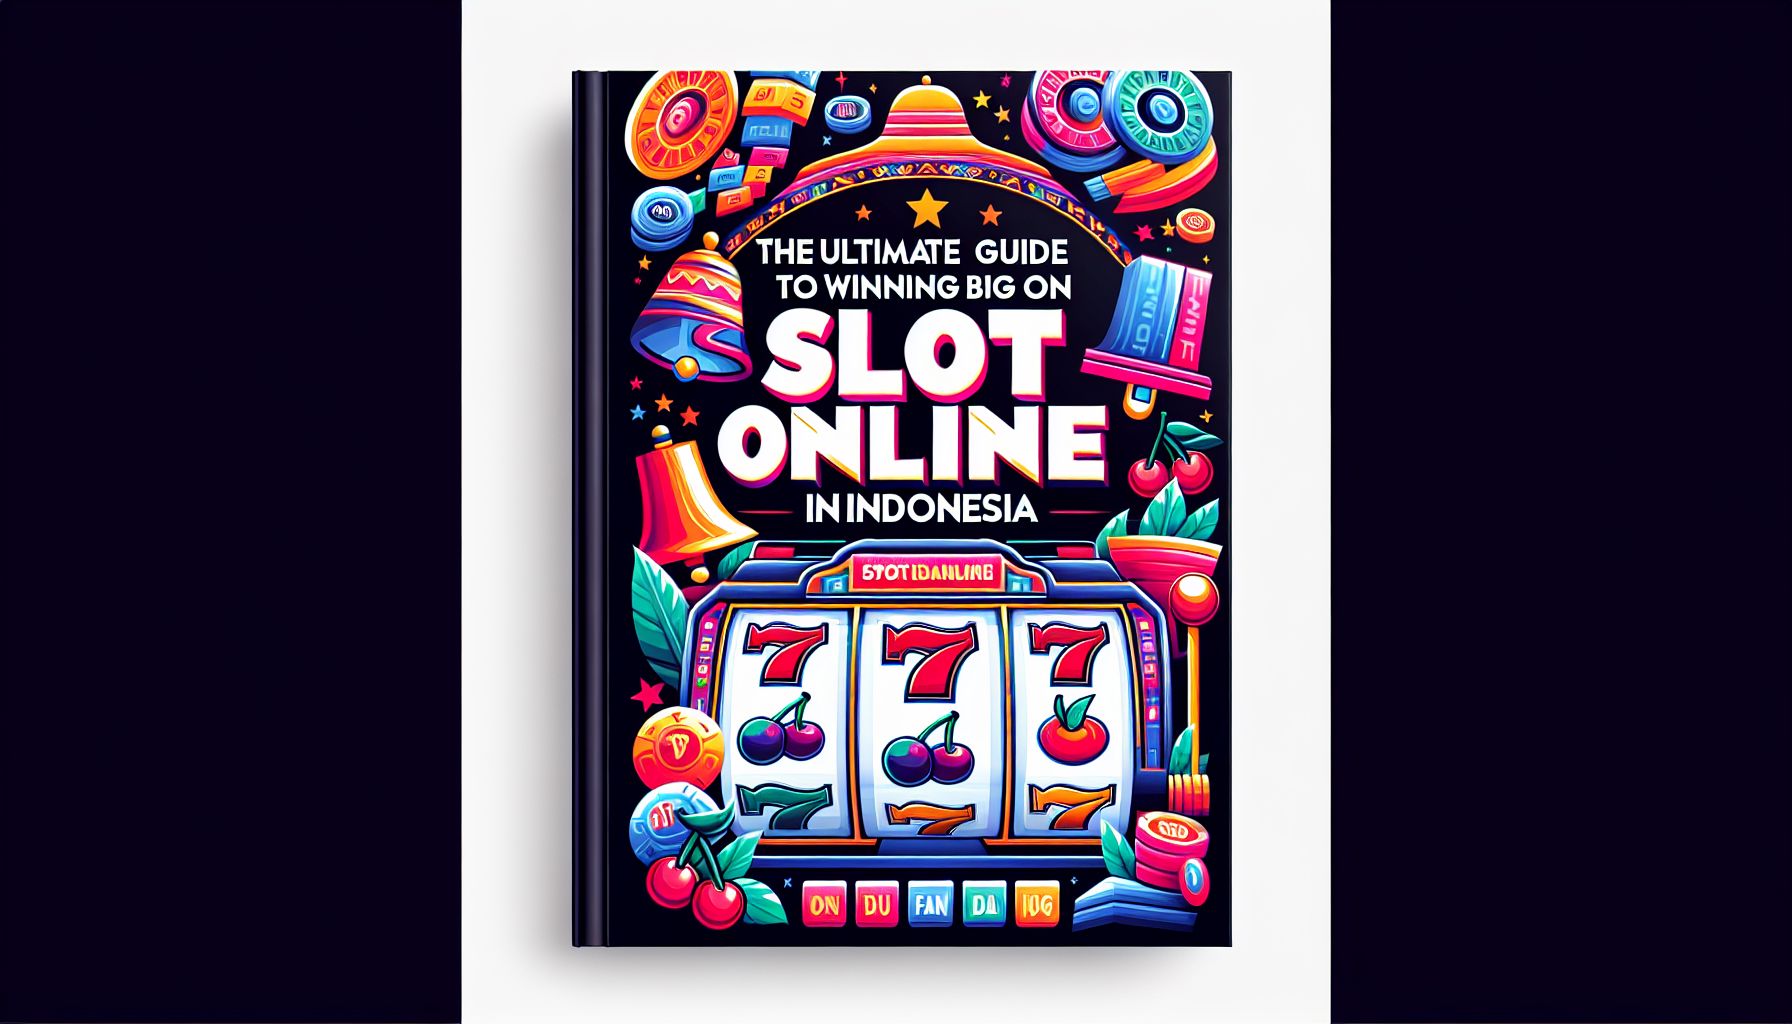 Slot Gacor: The Ultimate Guide to Winning Big on Slot Online in Indonesia